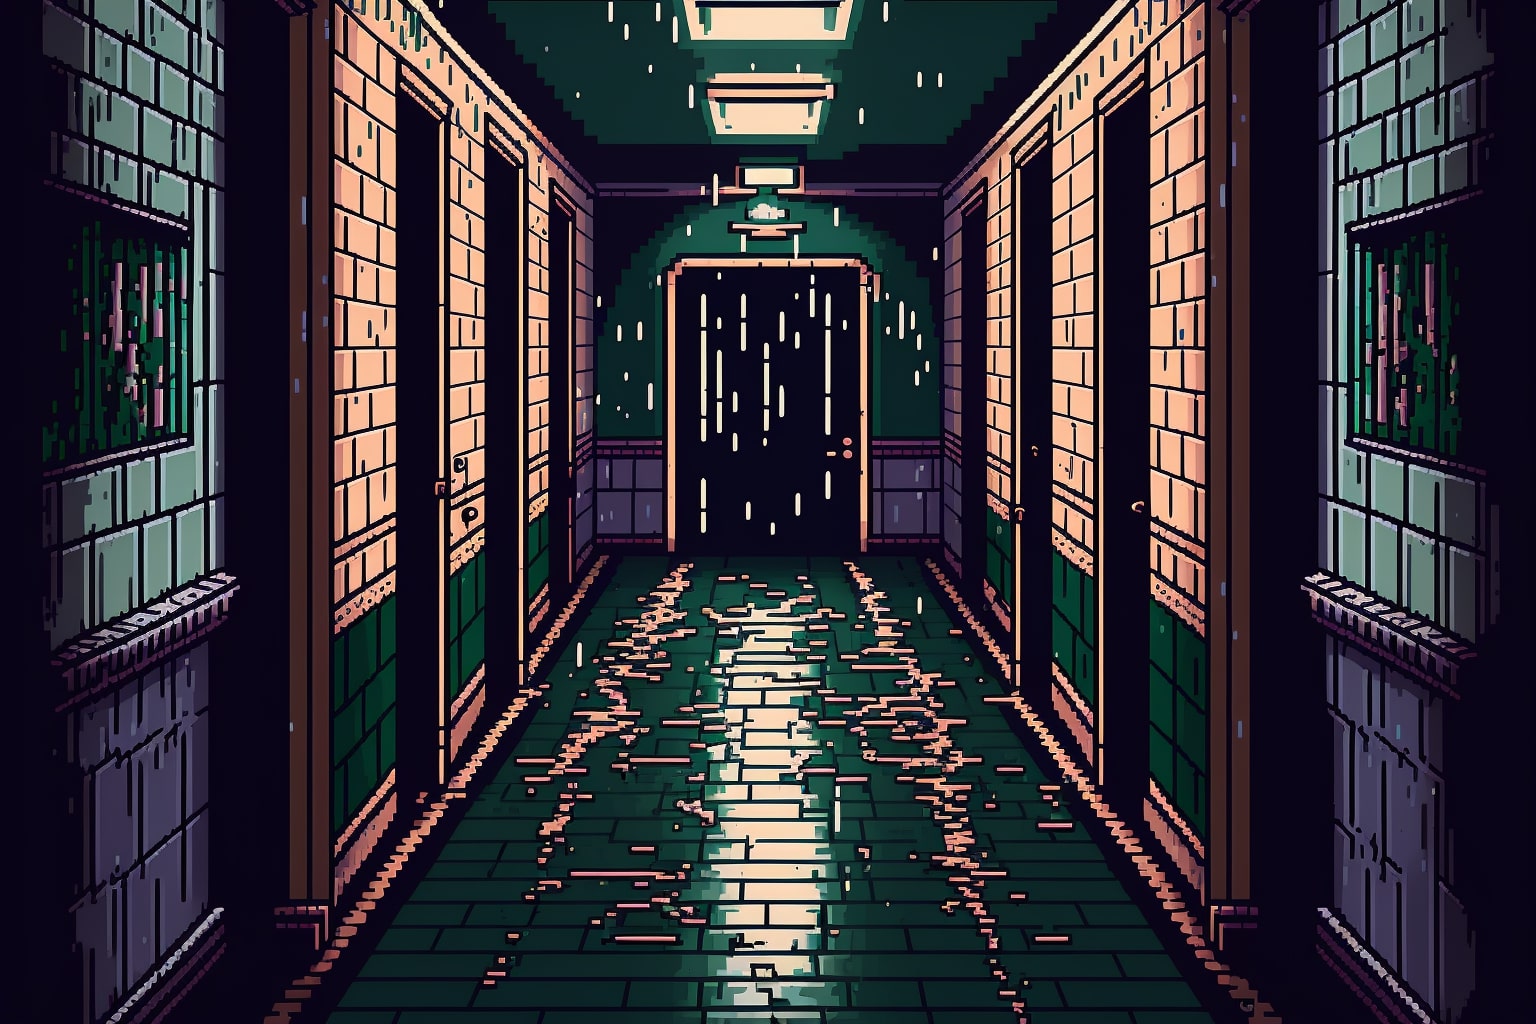 Pixel art picture of a long hallway.